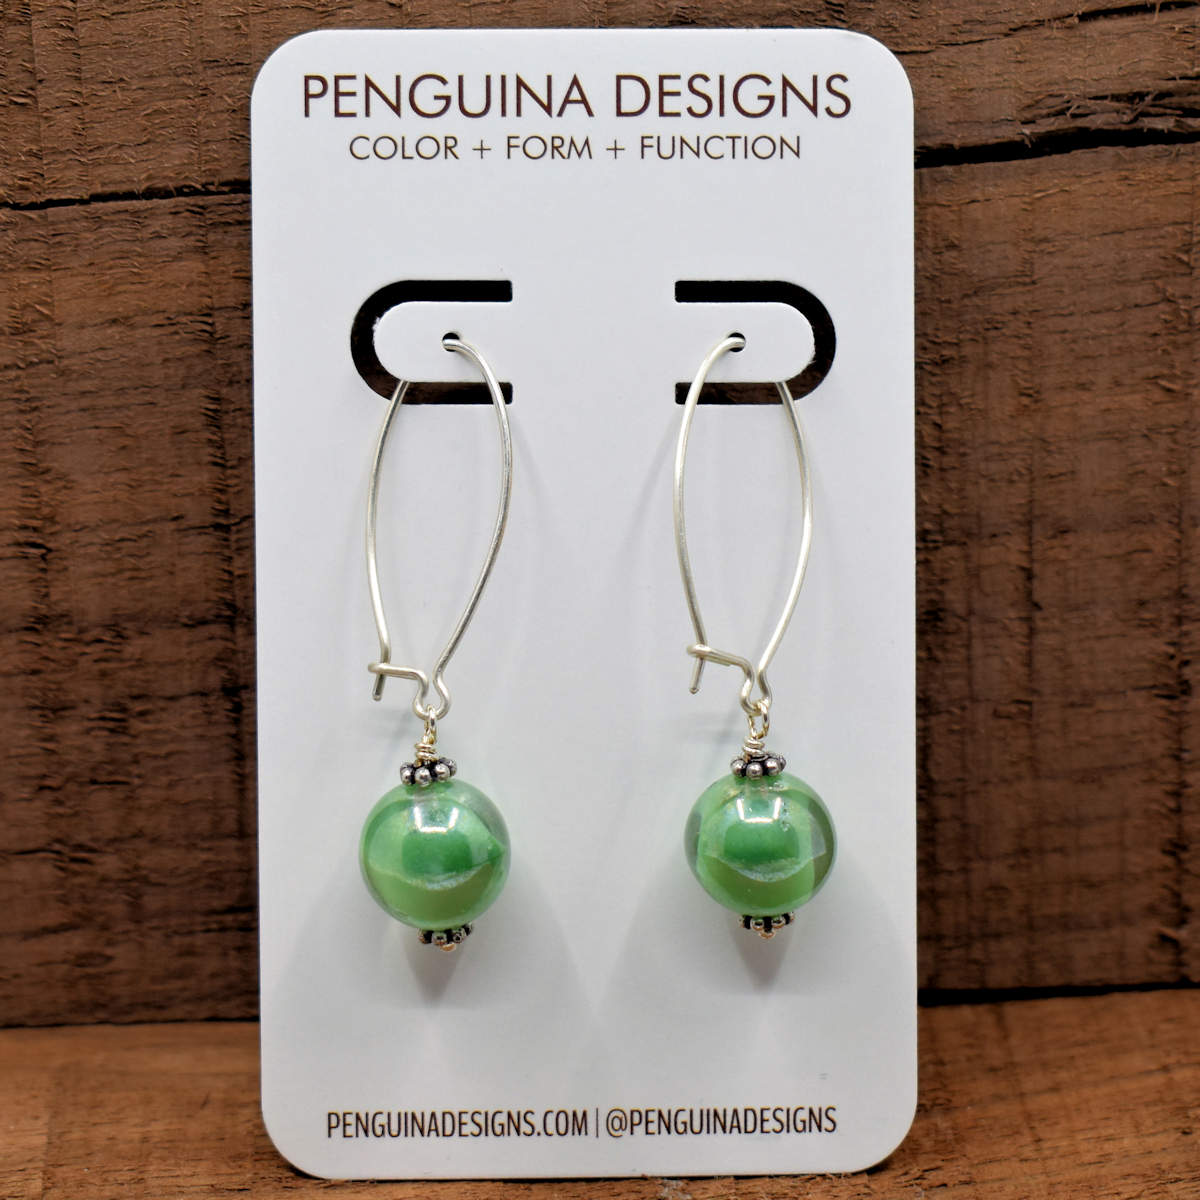 A pair of earrings on a white card rest against a wood background. The earrings have long silver oval wires that latch and glass balls with swirled green and clear glass at the bottom.